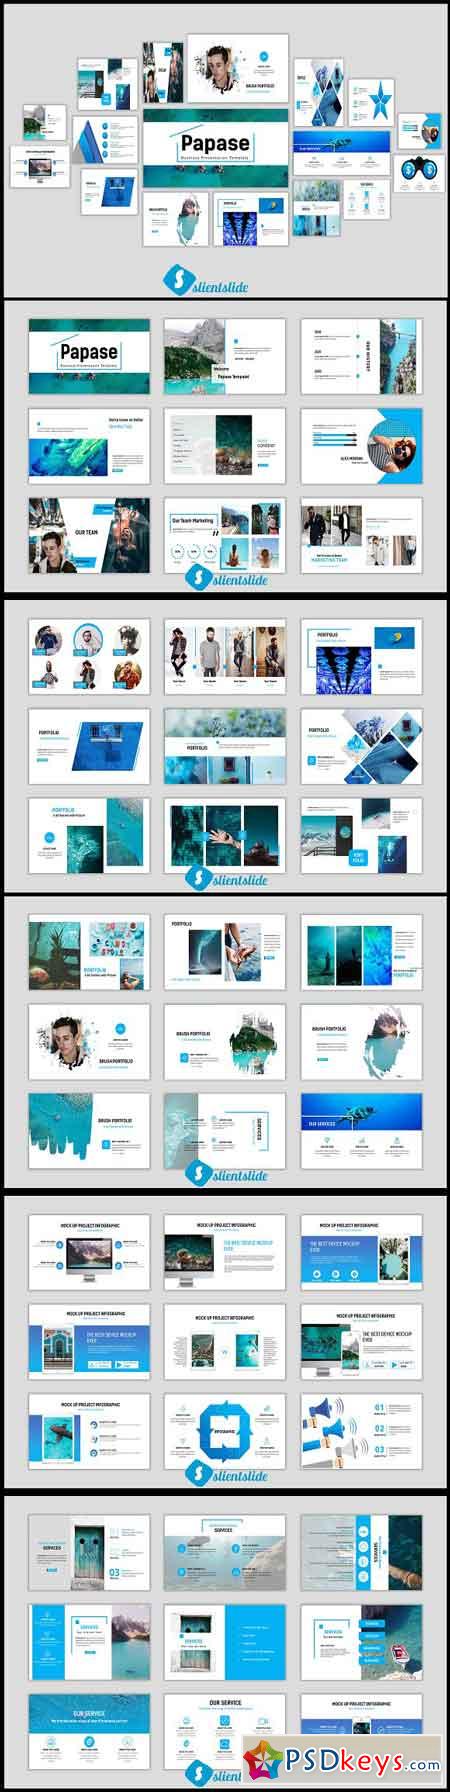 Papase Business Powerpoint Template 2848678